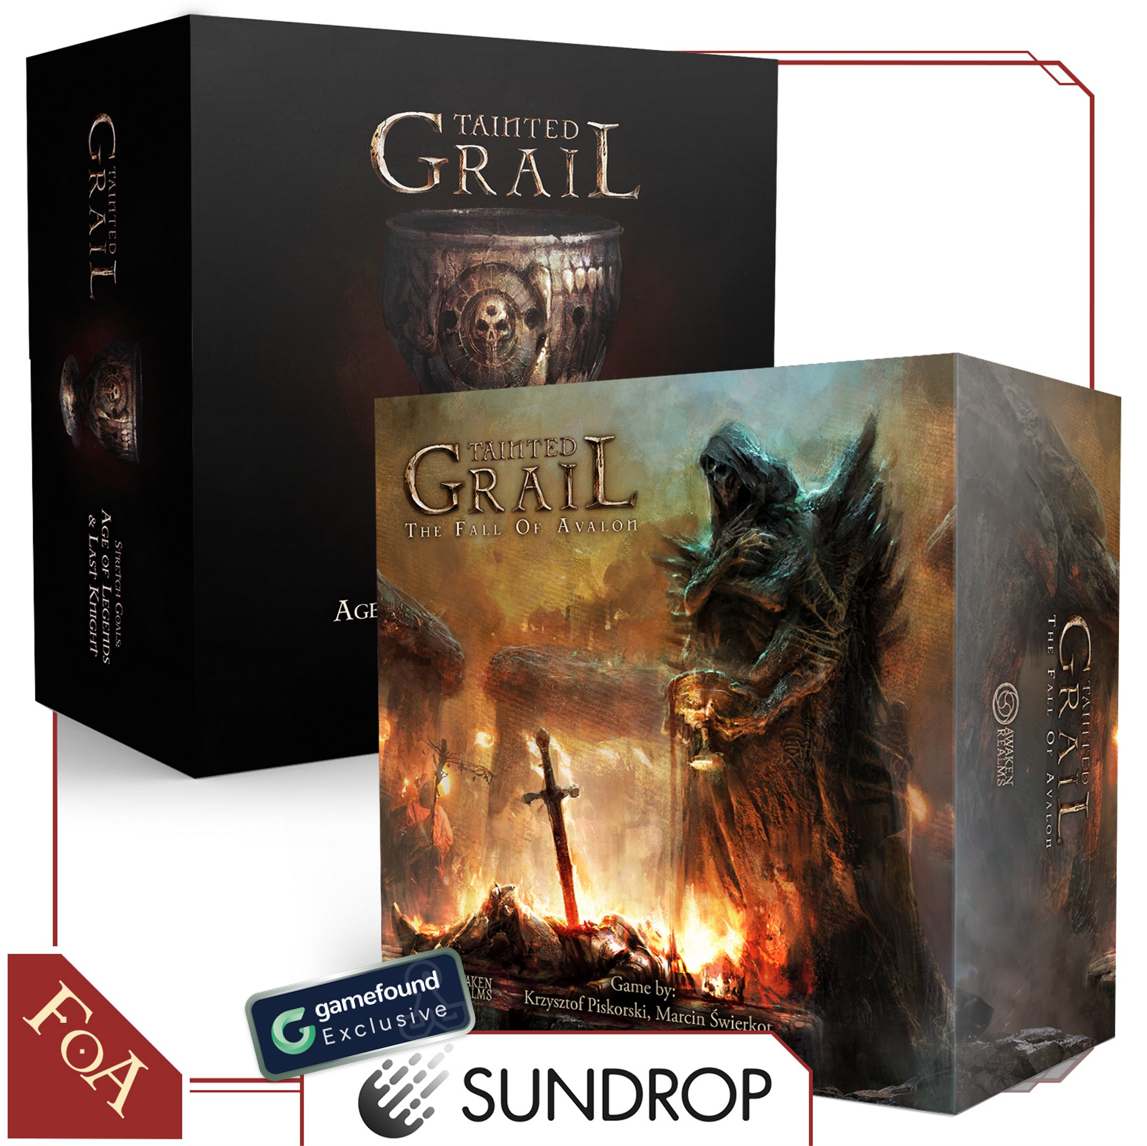 Gamefound Exclusive Tainted Grail: Fall of Avalon Core Pledge, Sundrop Edition